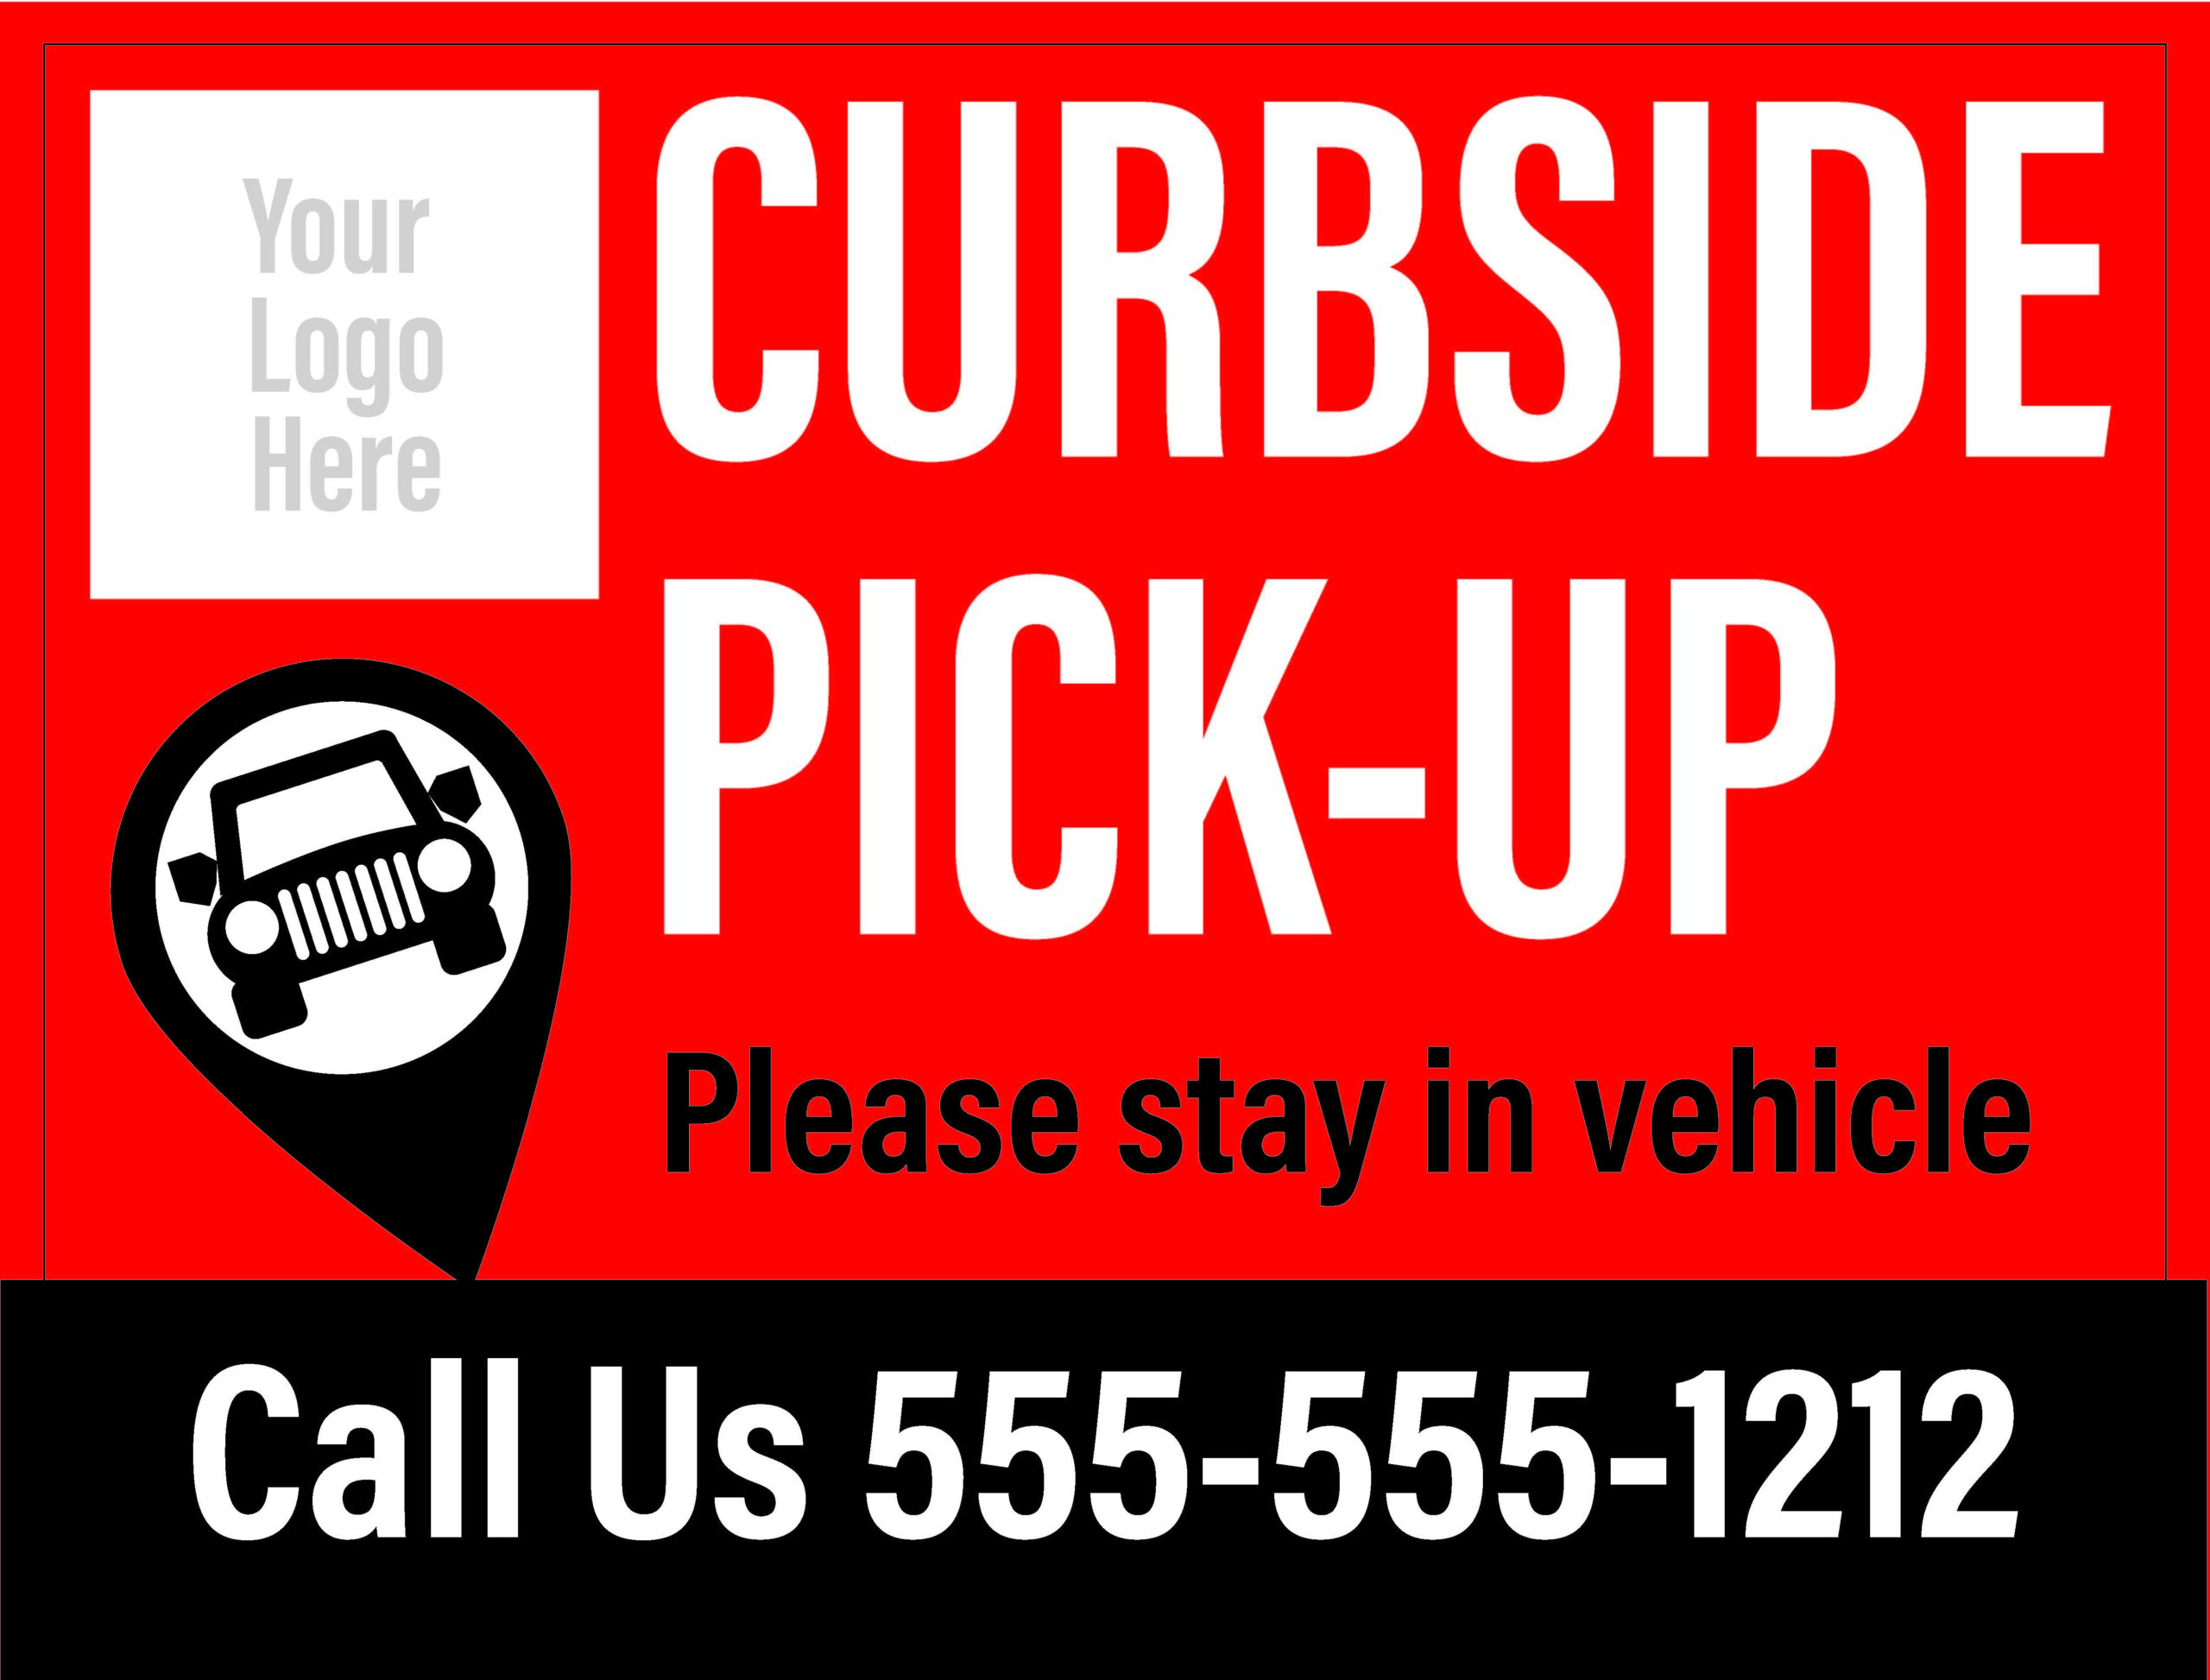 Curbside Pickup Signs 24”x 18”